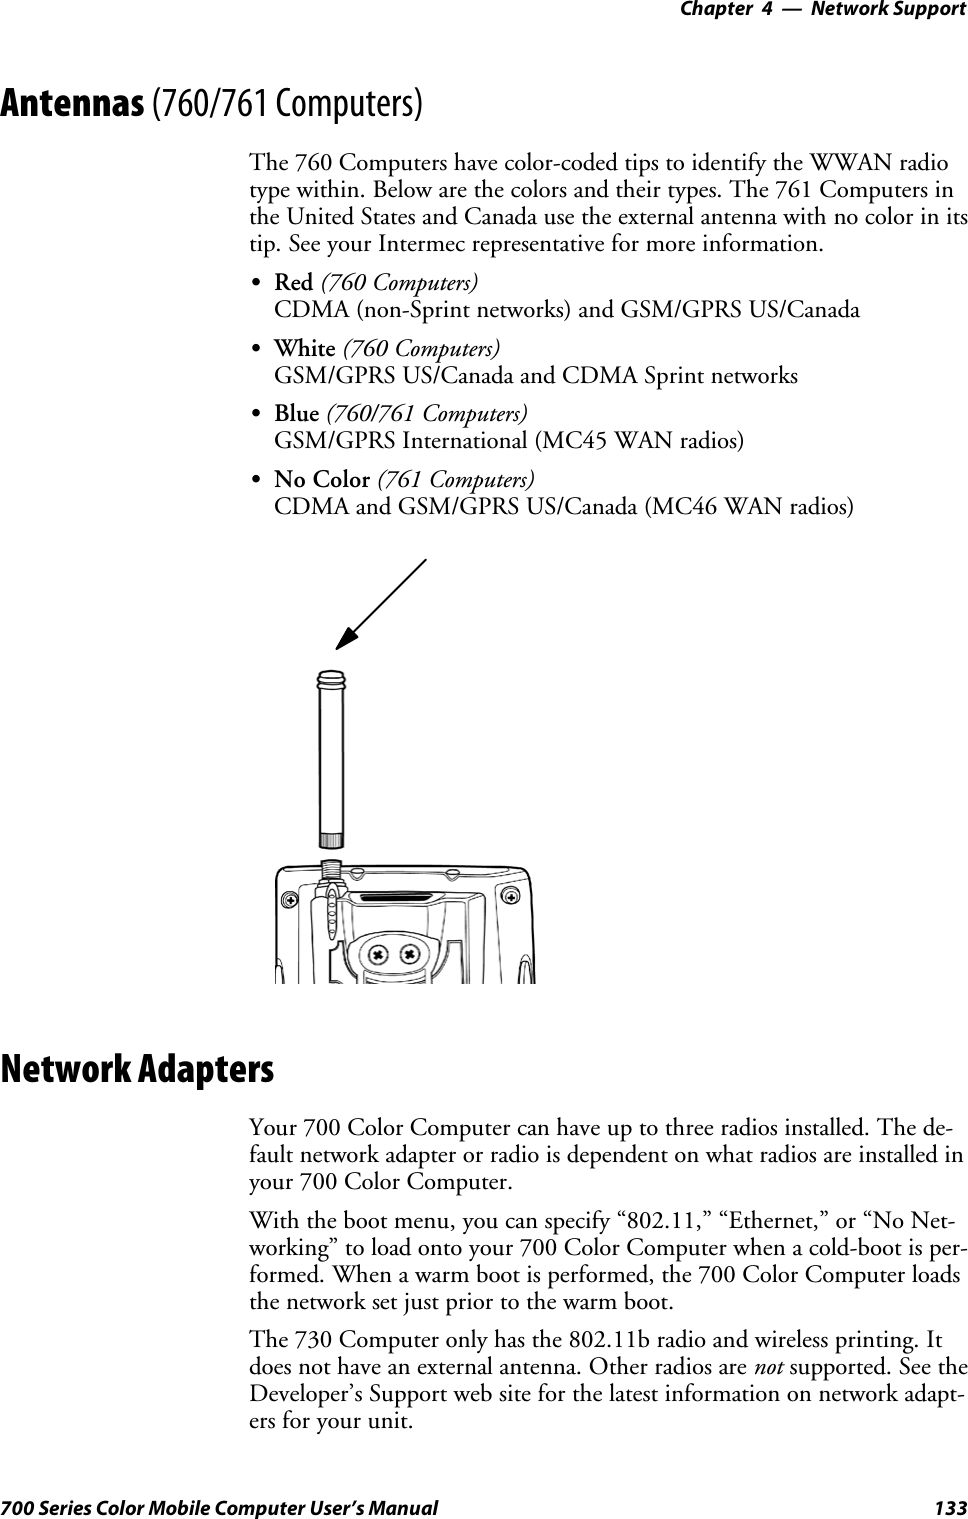 Network Support—Chapter 4133700 Series Color Mobile Computer User’s ManualAntennas (760/761 Computers)The 760 Computers have color-coded tips to identify the WWAN radiotype within. Below are the colors and their types. The 761 Computers inthe United States and Canada use the external antenna with no color in itstip. See your Intermec representative for more information.SRed (760 Computers)CDMA (non-Sprint networks) and GSM/GPRS US/CanadaSWhite (760 Computers)GSM/GPRS US/Canada and CDMA Sprint networksSBlue (760/761 Computers)GSM/GPRS International (MC45 WAN radios)SNo Color (761 Computers)CDMA and GSM/GPRS US/Canada (MC46 WAN radios)Network AdaptersYour 700 Color Computer can have up to three radios installed. The de-fault network adapter or radio is dependent on what radios are installed inyour 700 Color Computer.With the boot menu, you can specify “802.11,” “Ethernet,” or “No Net-working” to load onto your 700 Color Computer when a cold-boot is per-formed. When a warm boot is performed, the 700 Color Computer loadsthe network set just prior to the warm boot.The 730 Computer only has the 802.11b radio and wireless printing. Itdoes not have an external antenna. Other radios are not supported. See theDeveloper’s Support web site for the latest information on network adapt-ers for your unit.